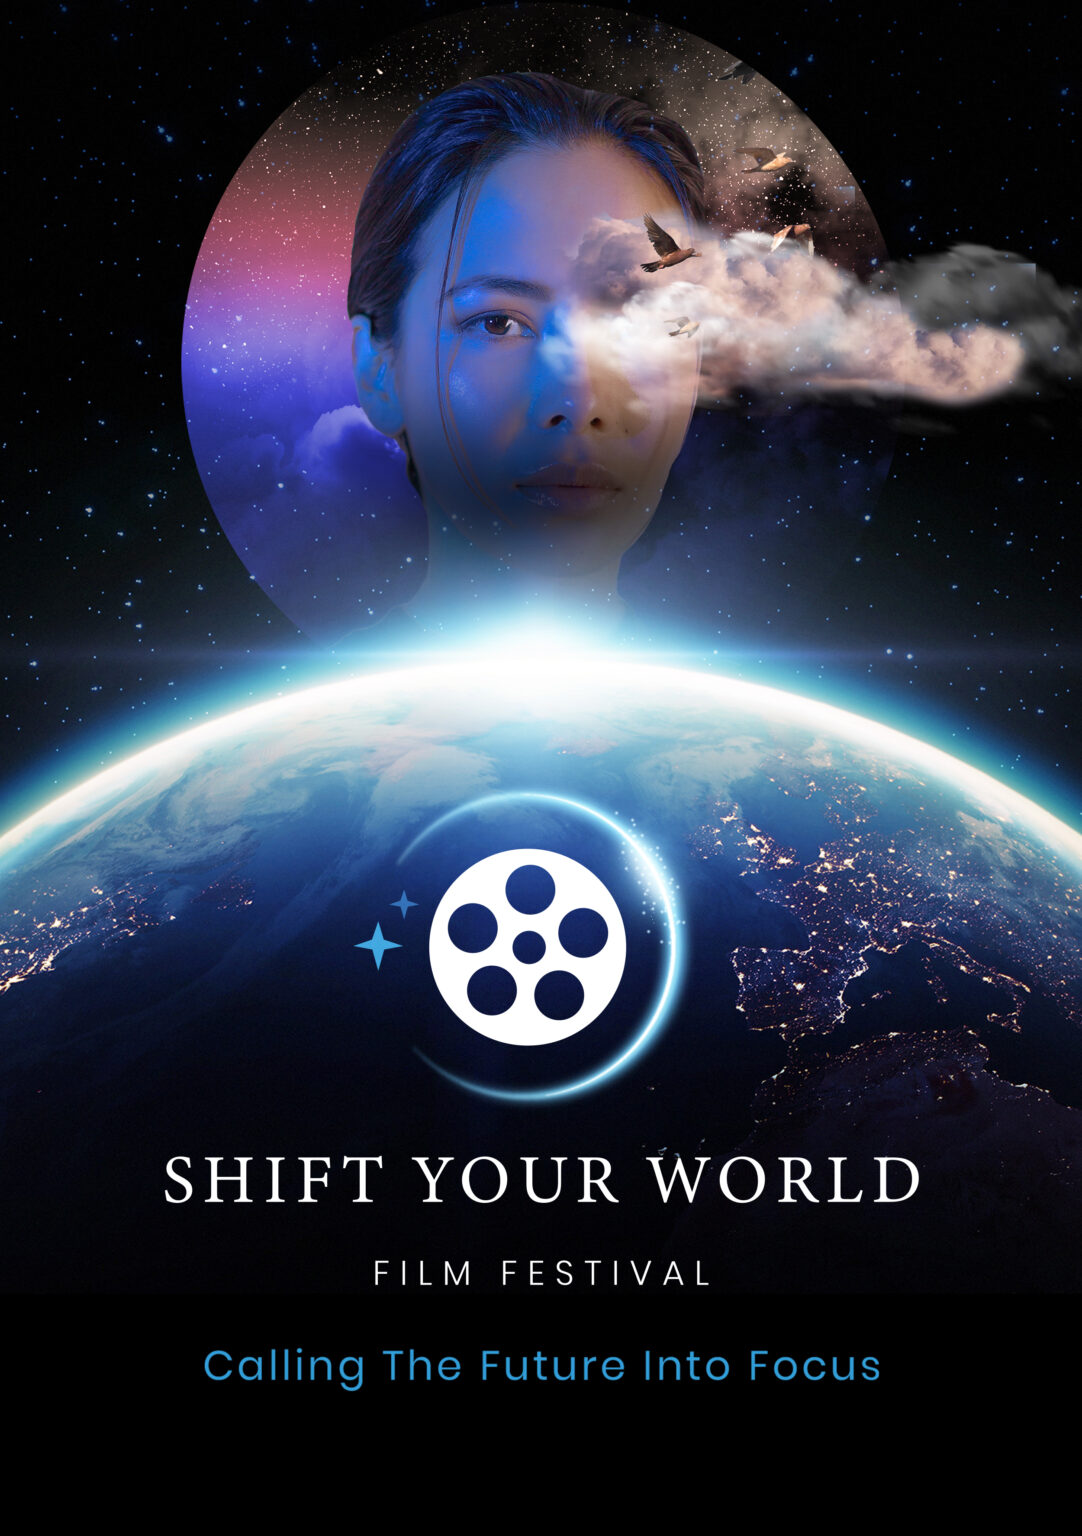 Shift Your World Film Festival is a new event that's being launched by the Shift Network. Learn more about it here.